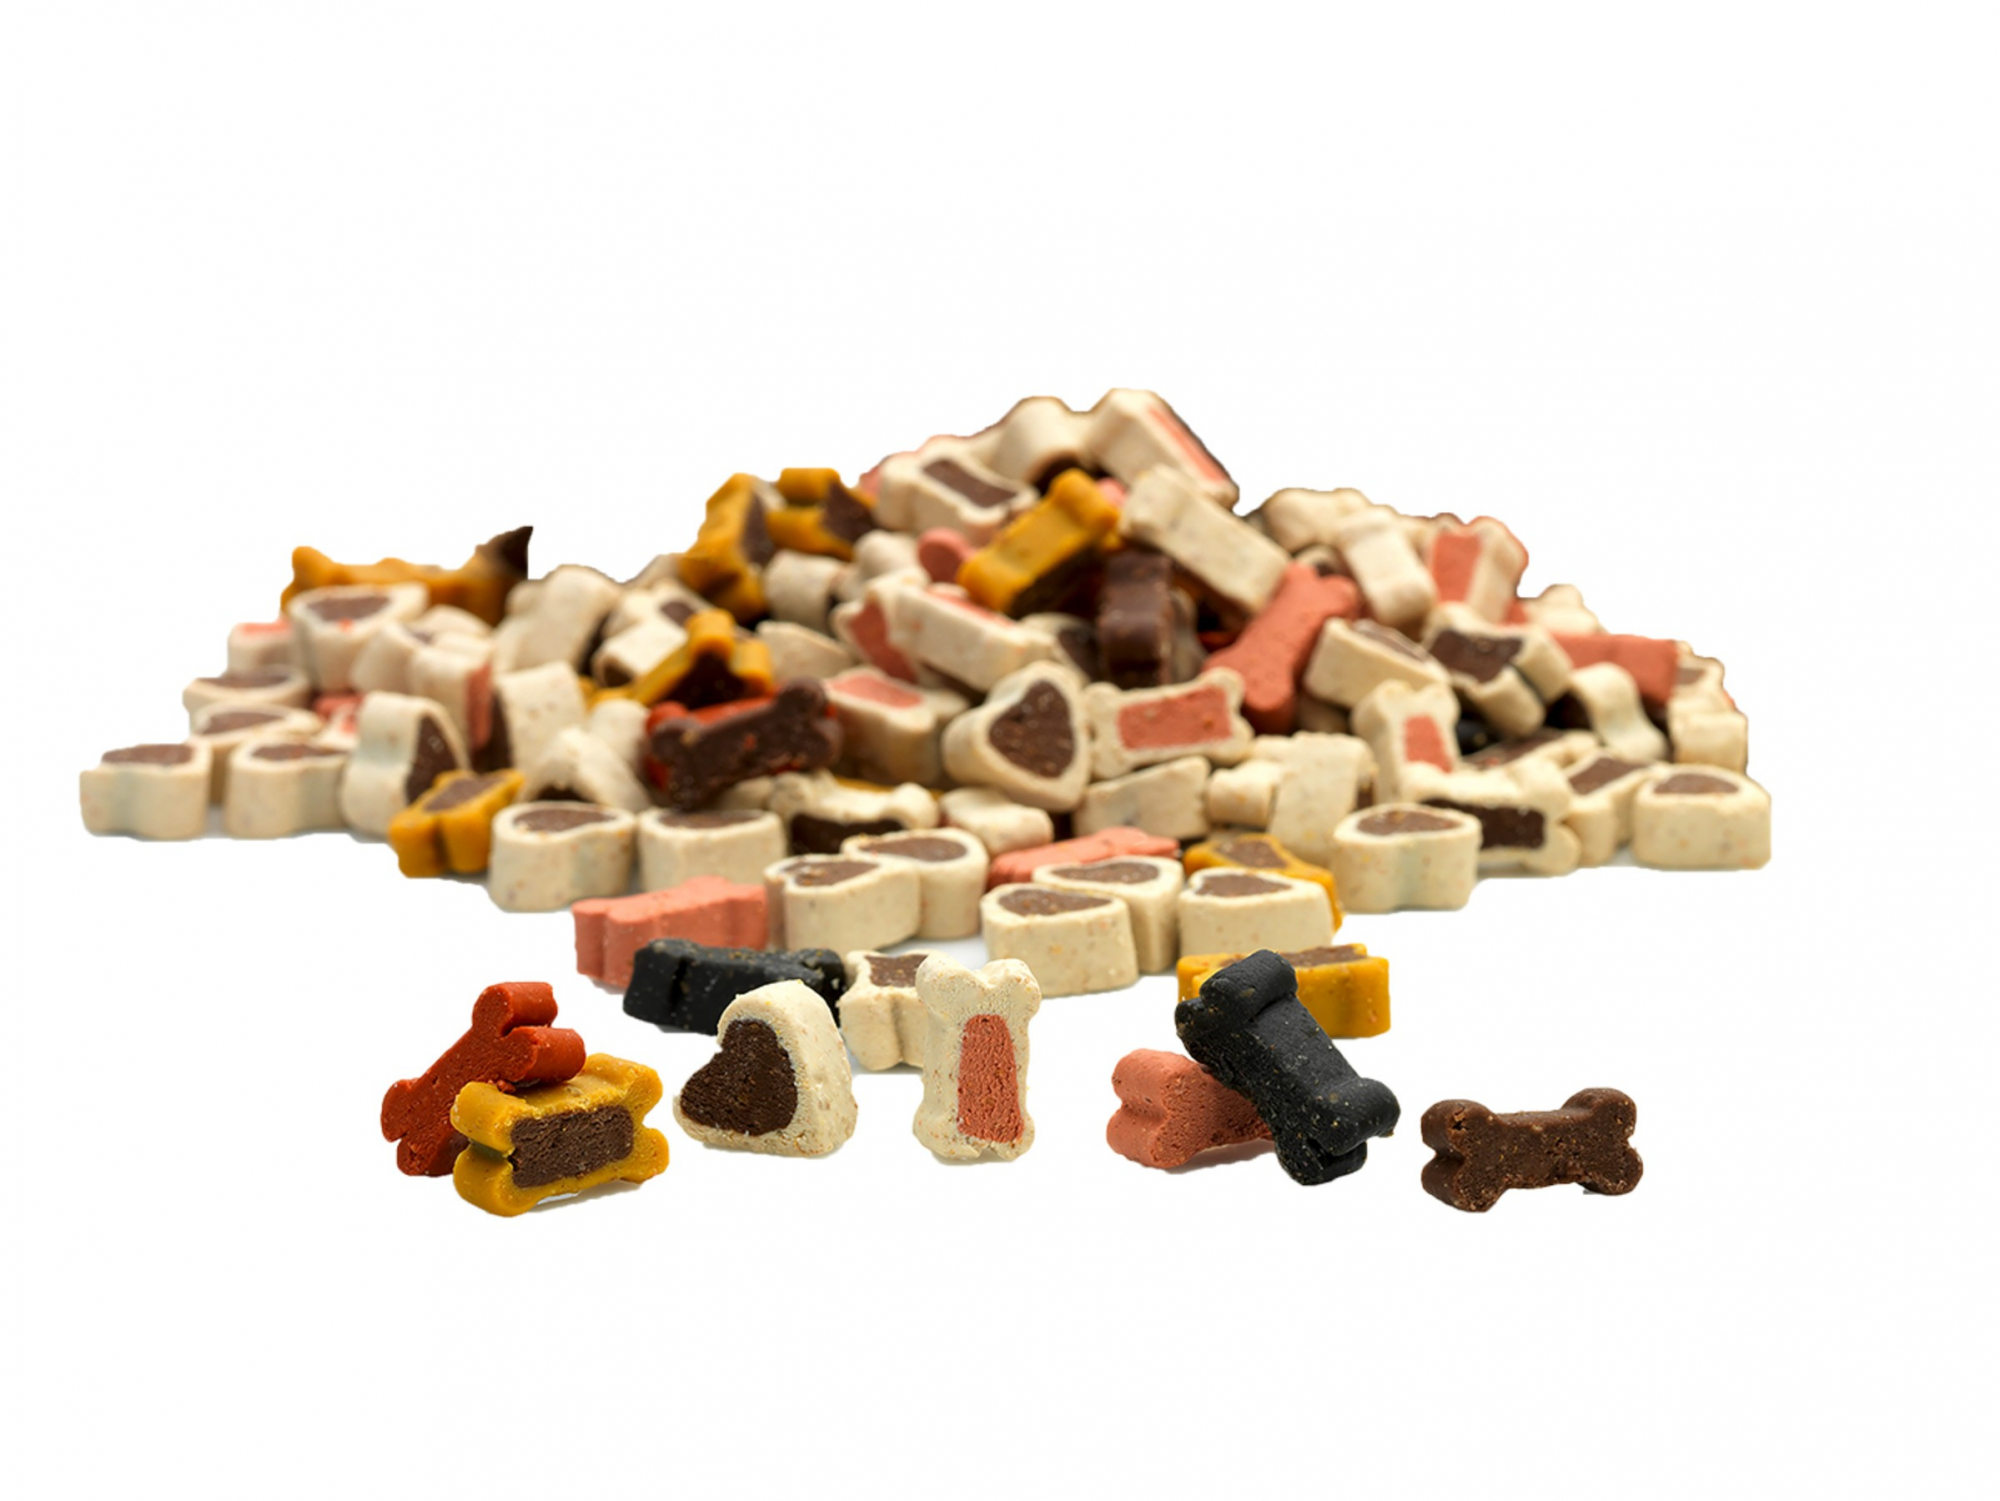 Friandise candy Party mix